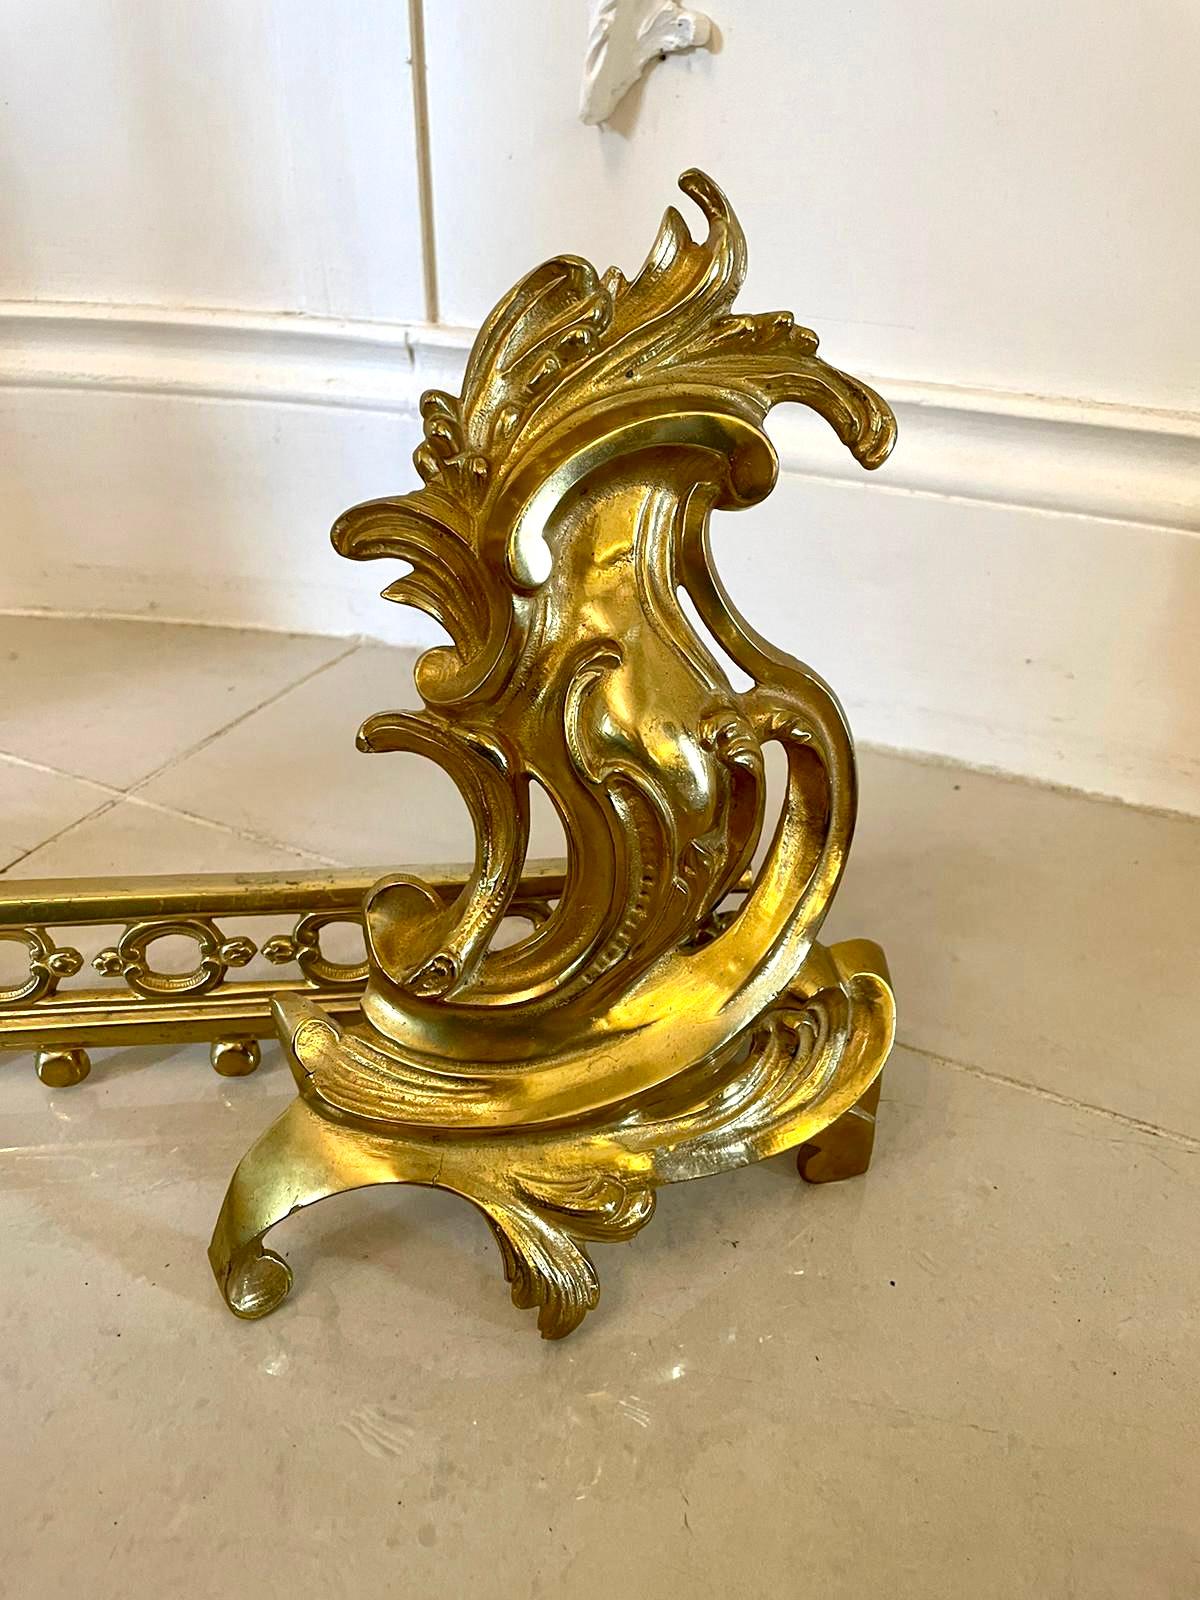 Fine quality french ornate gilded brass extending fender having stunning ornate gilded brass ends with scrolls and a gilded brass extending front with a beautiful ornate centre.

In delightful original condition.

Measures: H 25cm
W 82cm 
D